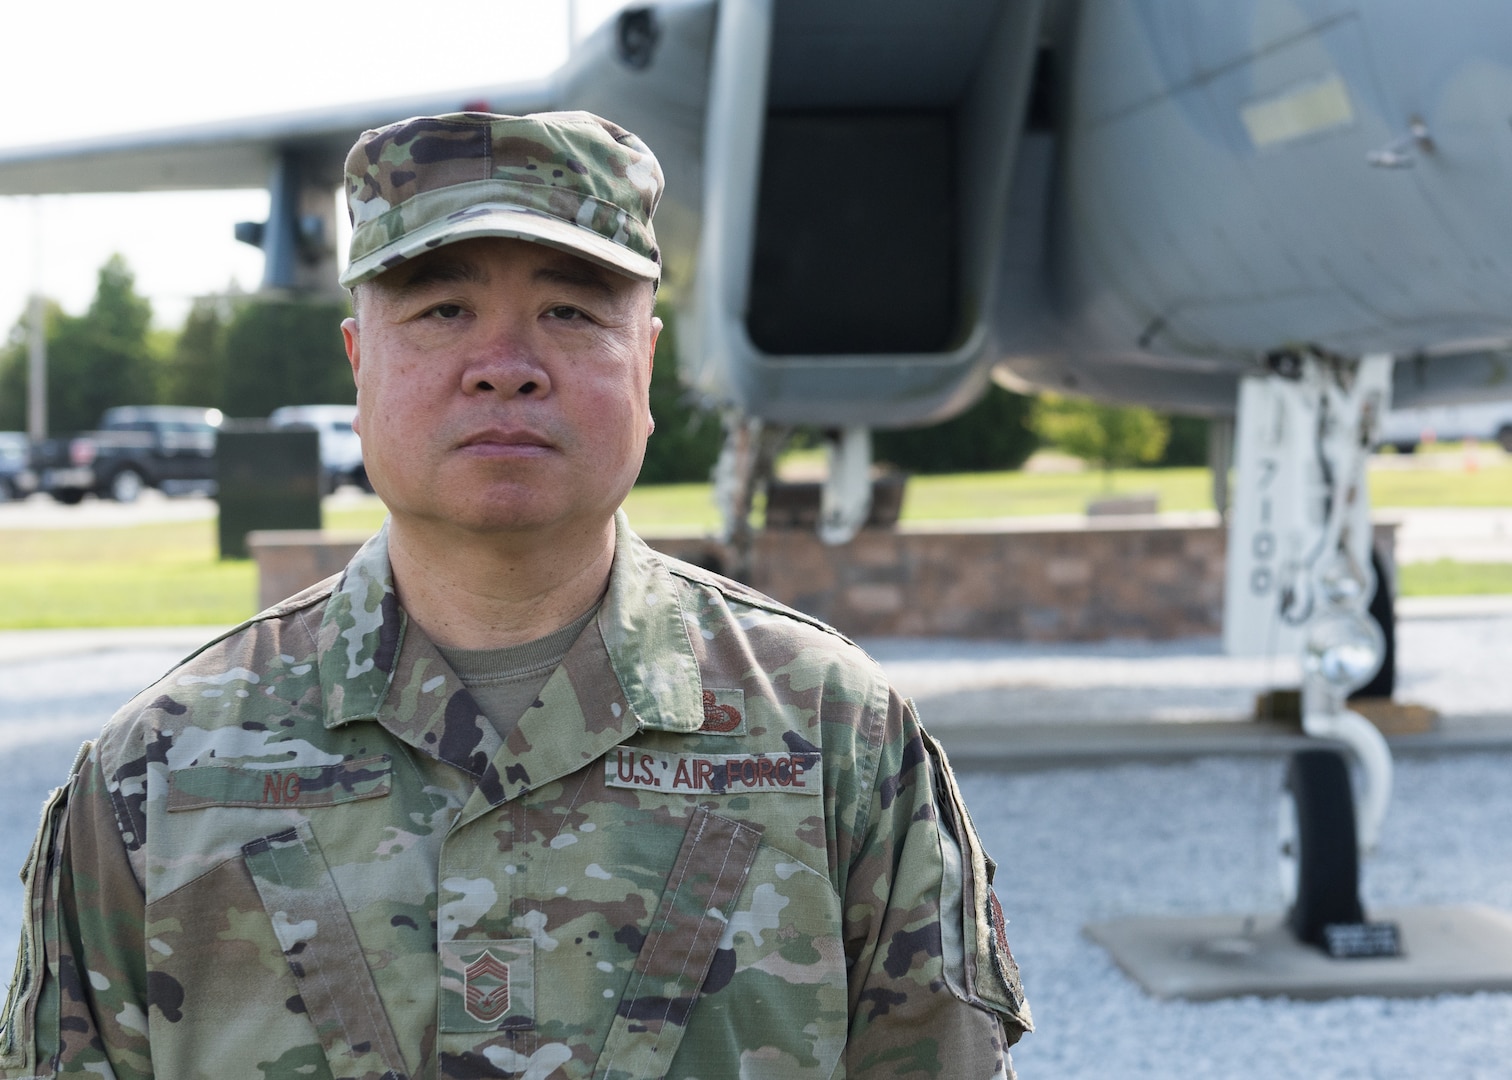 Chief Master Sgt. Wing Ng of the 102nd Intelligence Wing poses beside the F-15 he launched on Sept. 11, 2001.